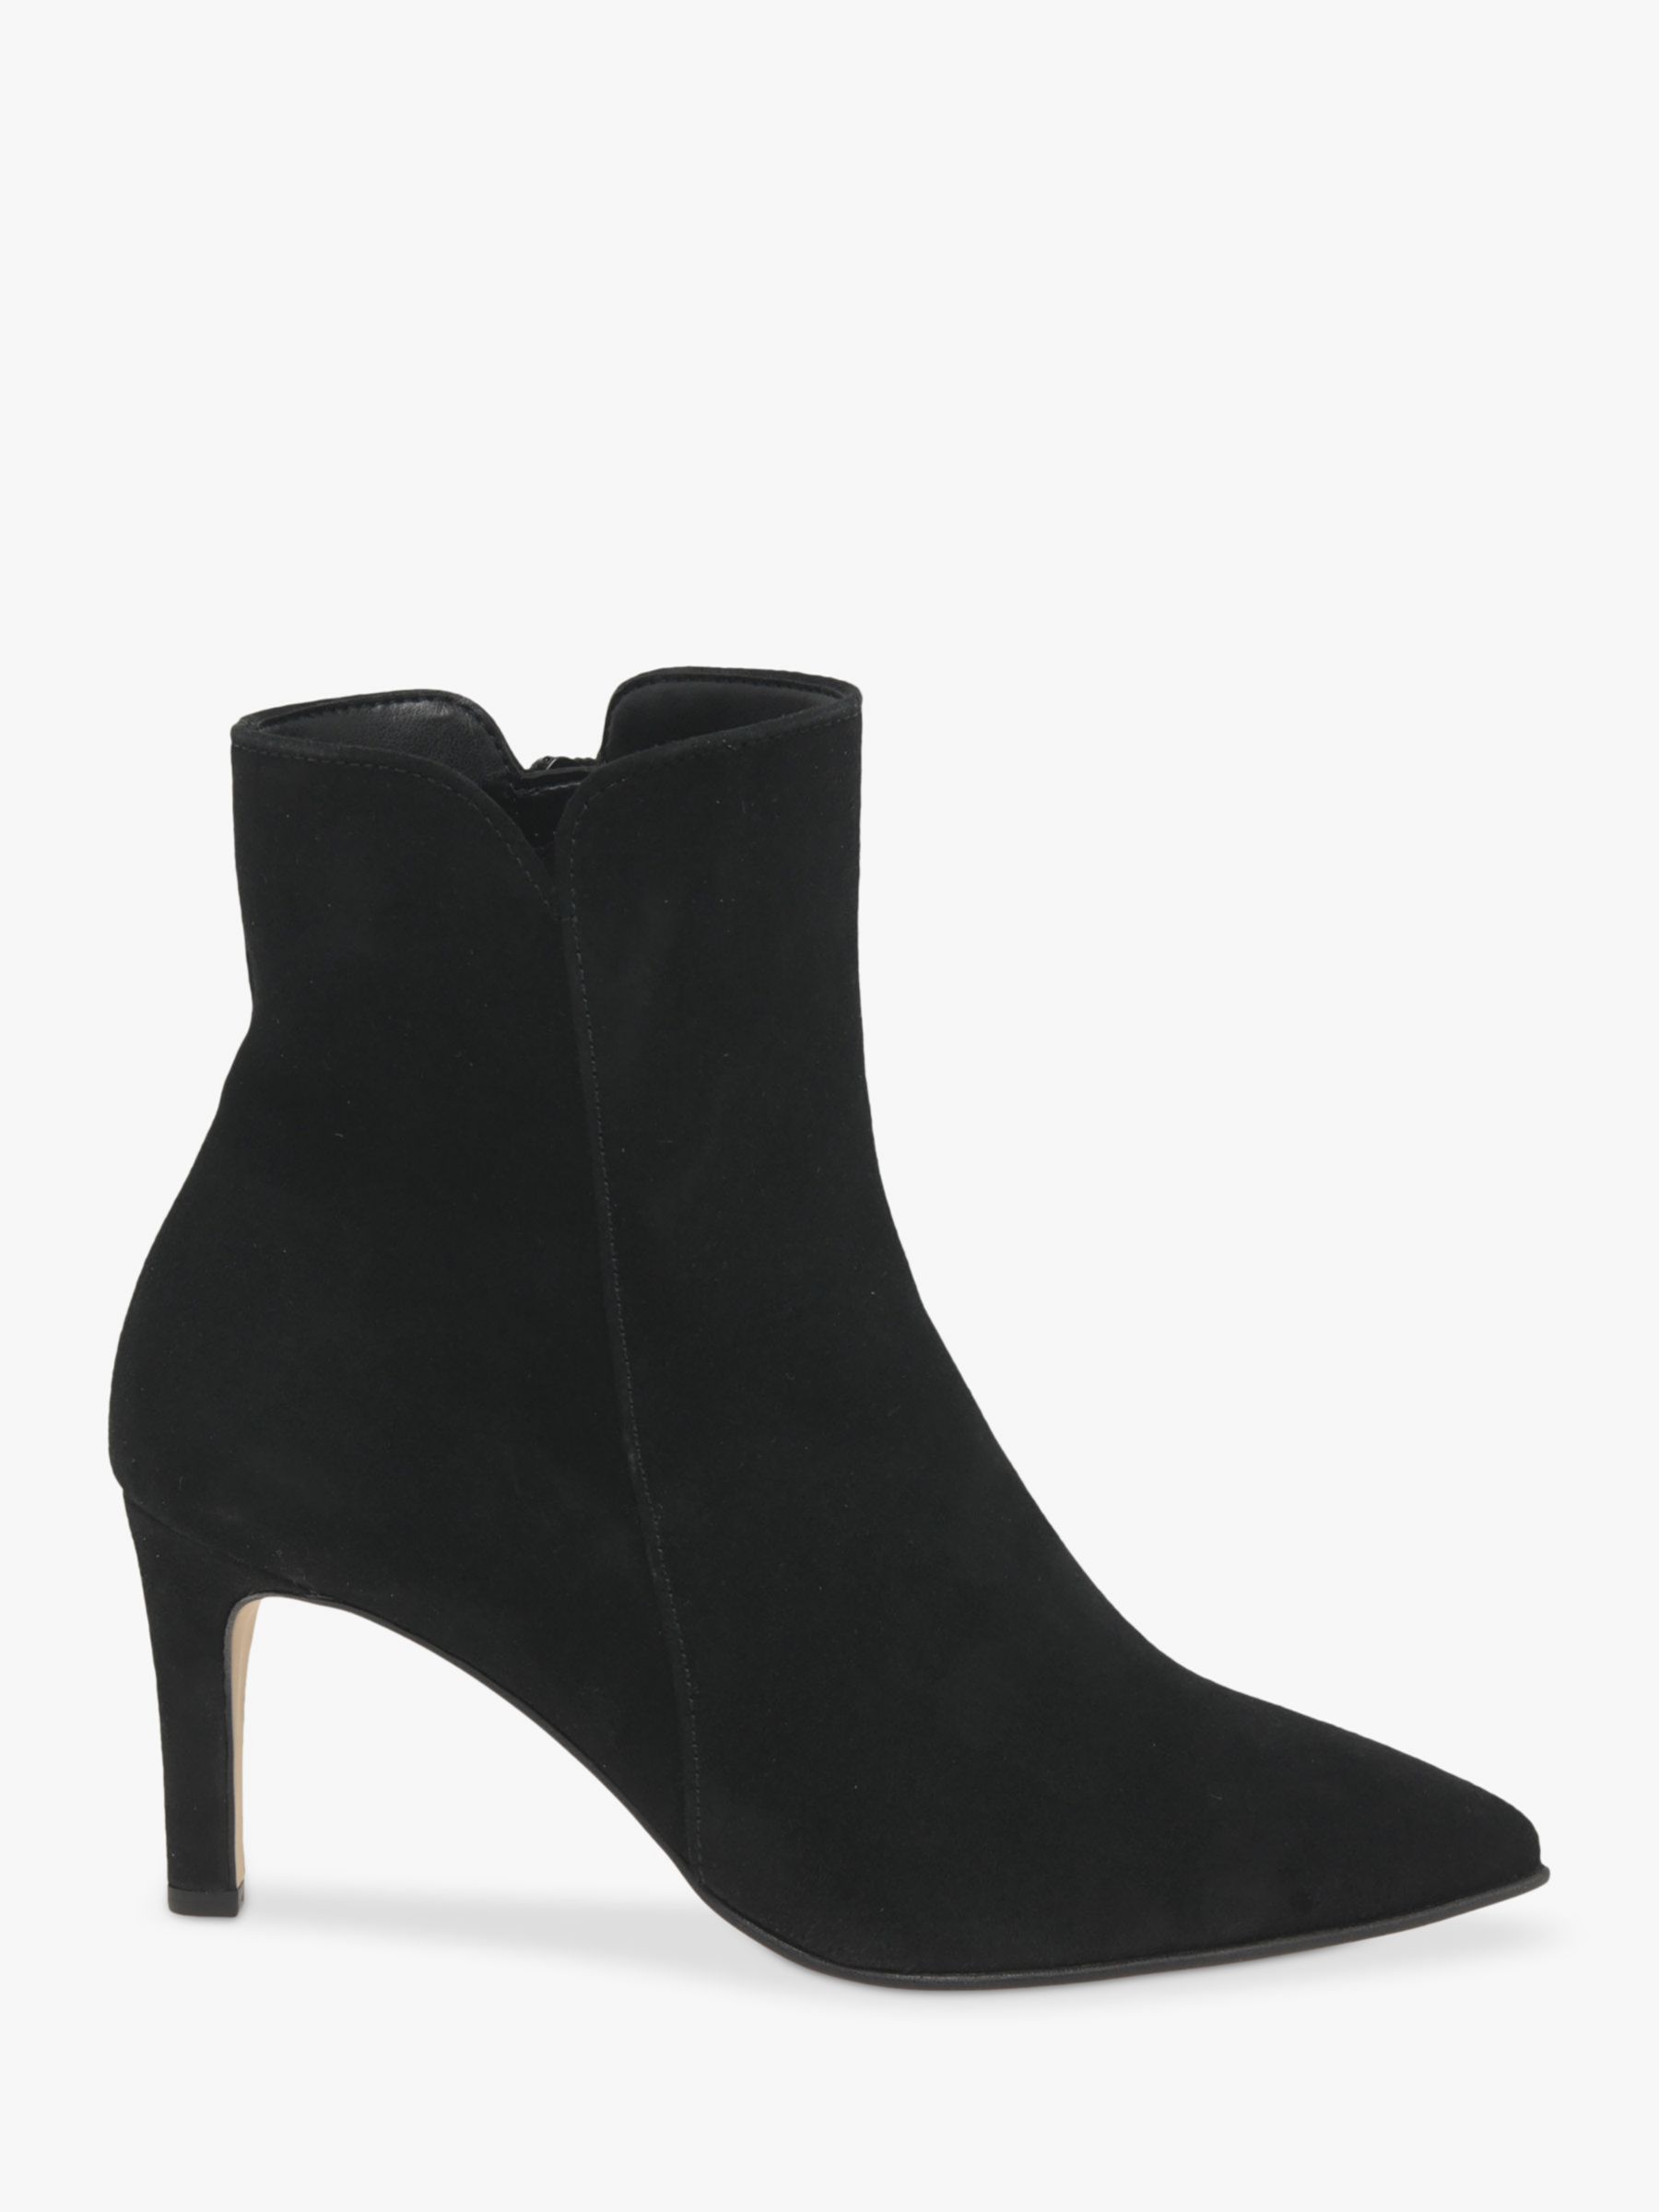 Gabor Bambro Dressy Suede Mid Heel Ankle Boots, Black, 3